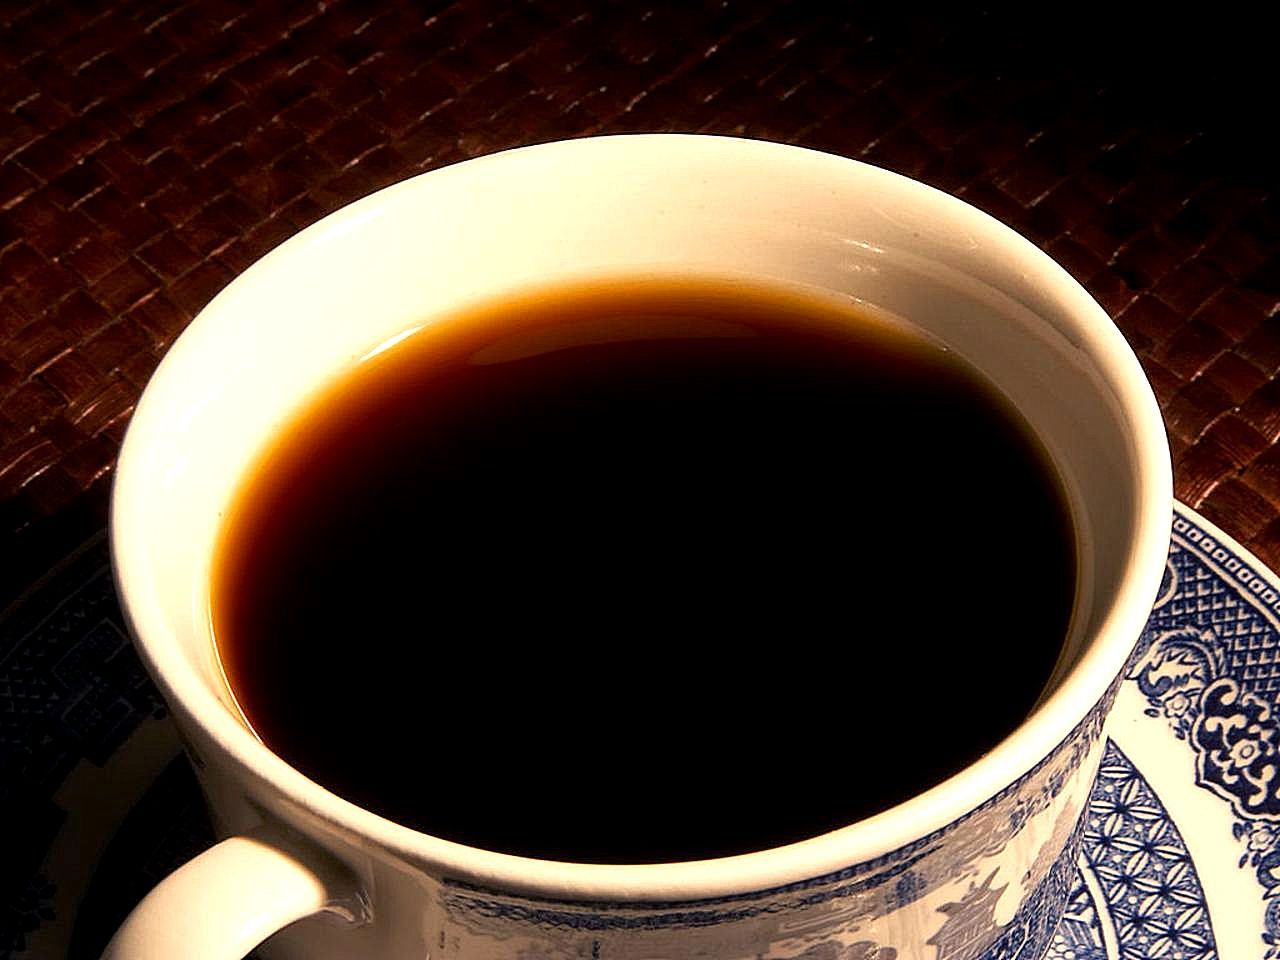 The caffeine in coffee can trigger bipolar episodes.